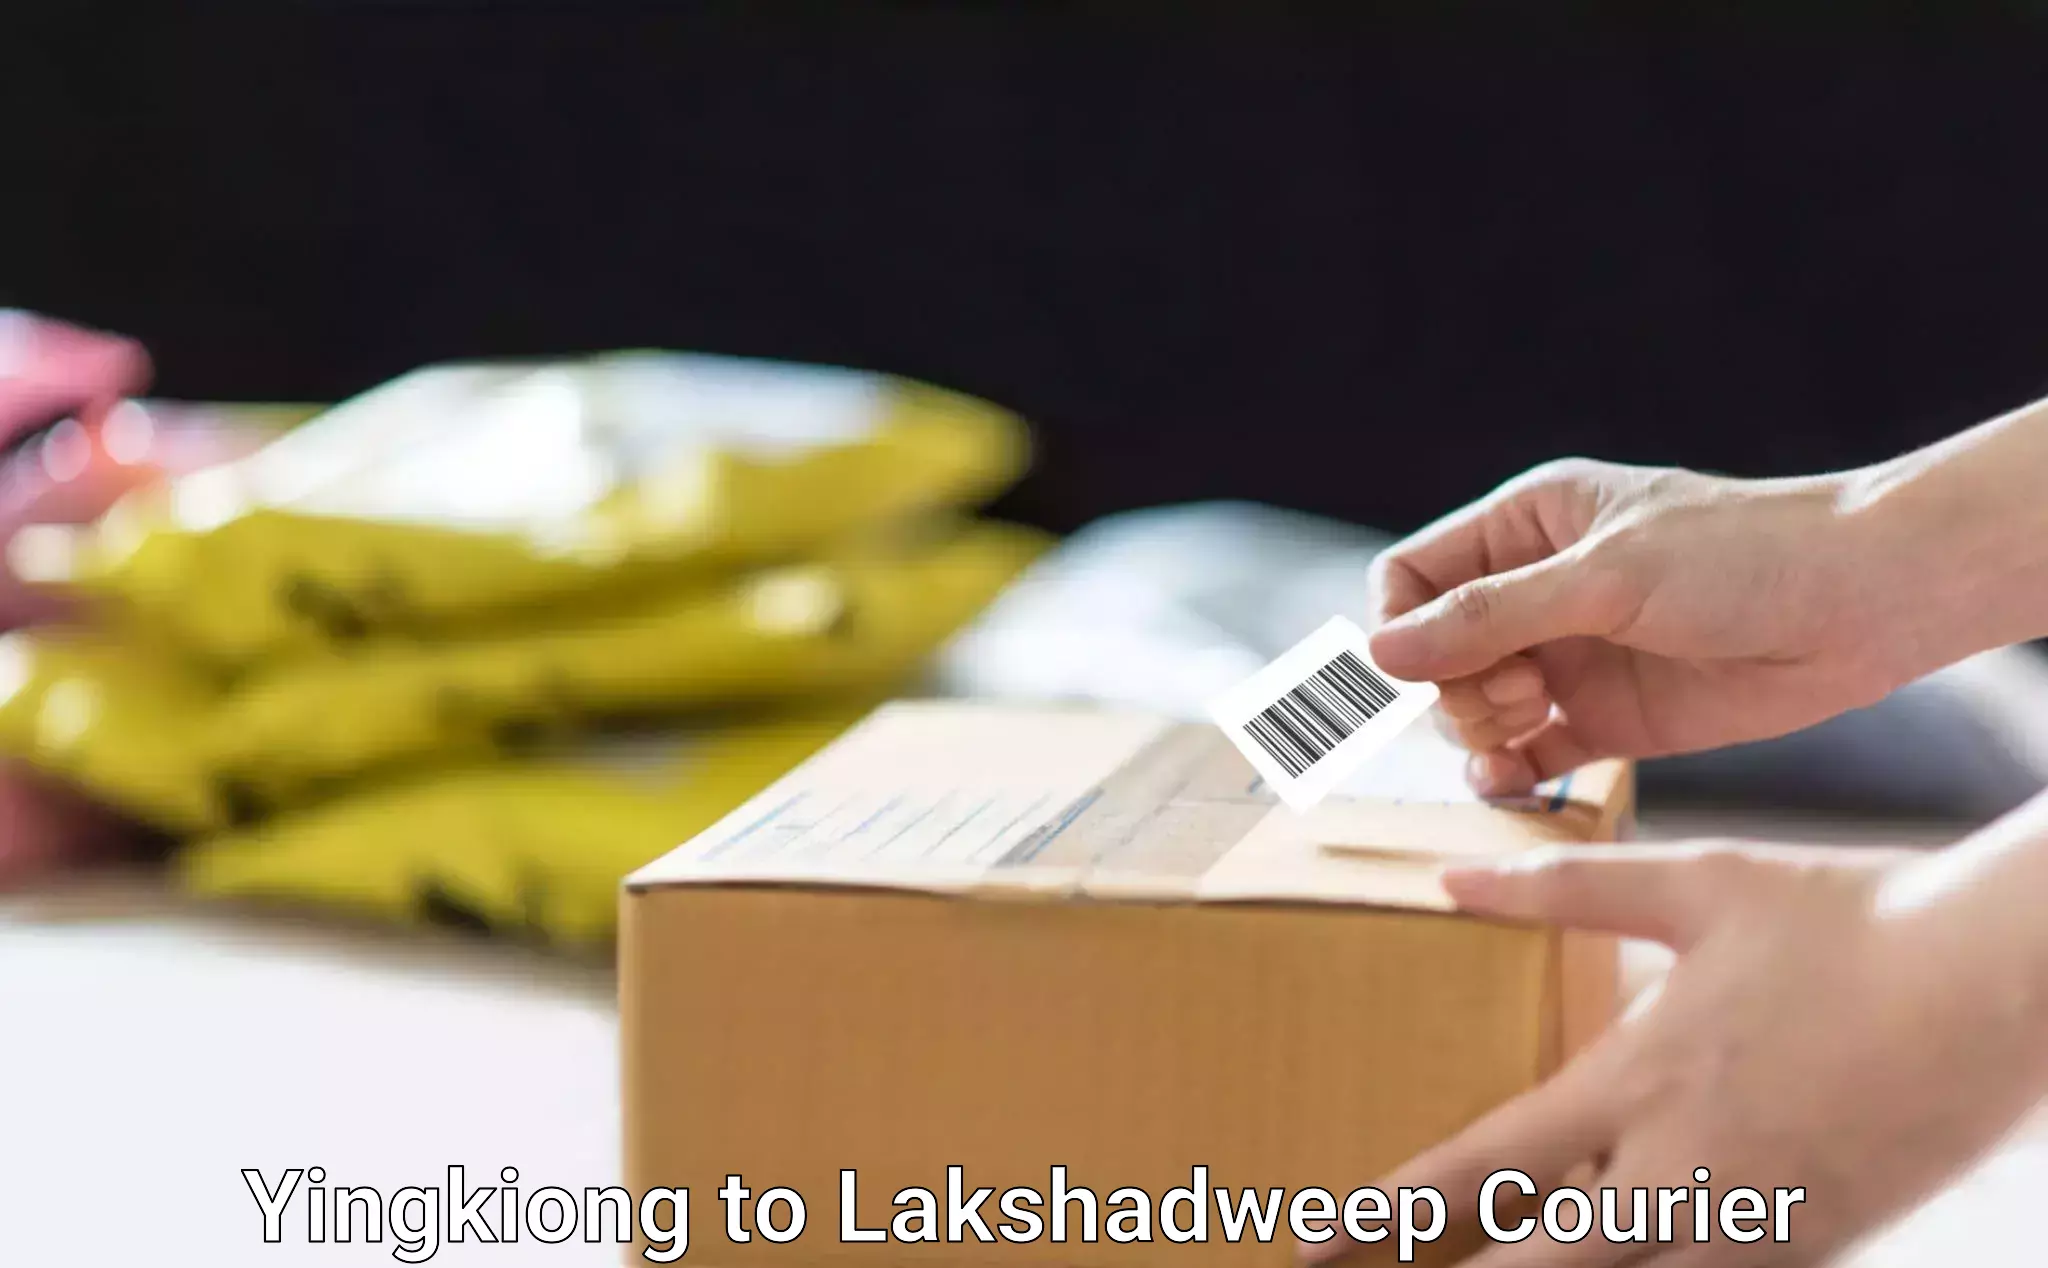 Weekend courier service Yingkiong to Lakshadweep